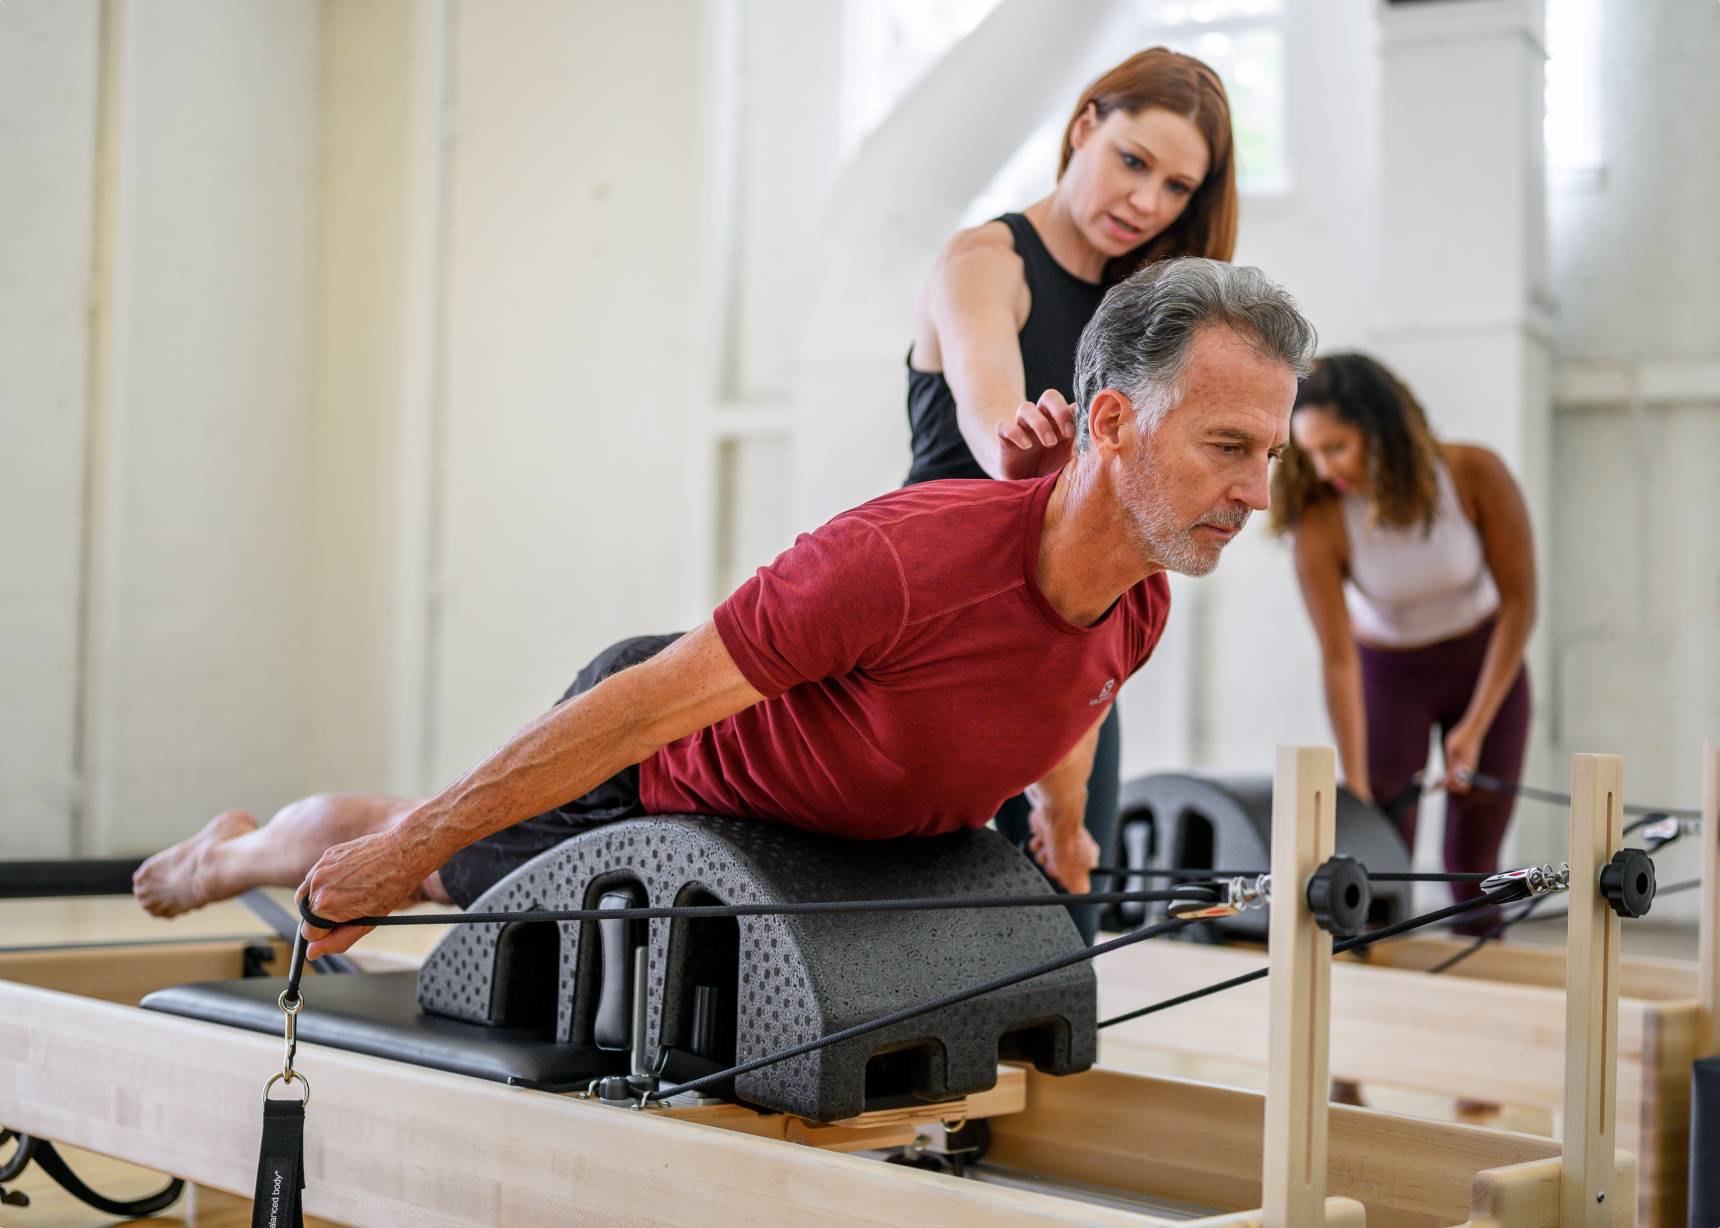 Pilates instructor aligning a client's posture while he holds a pose on a Pilates Arc on a Studio Reformer